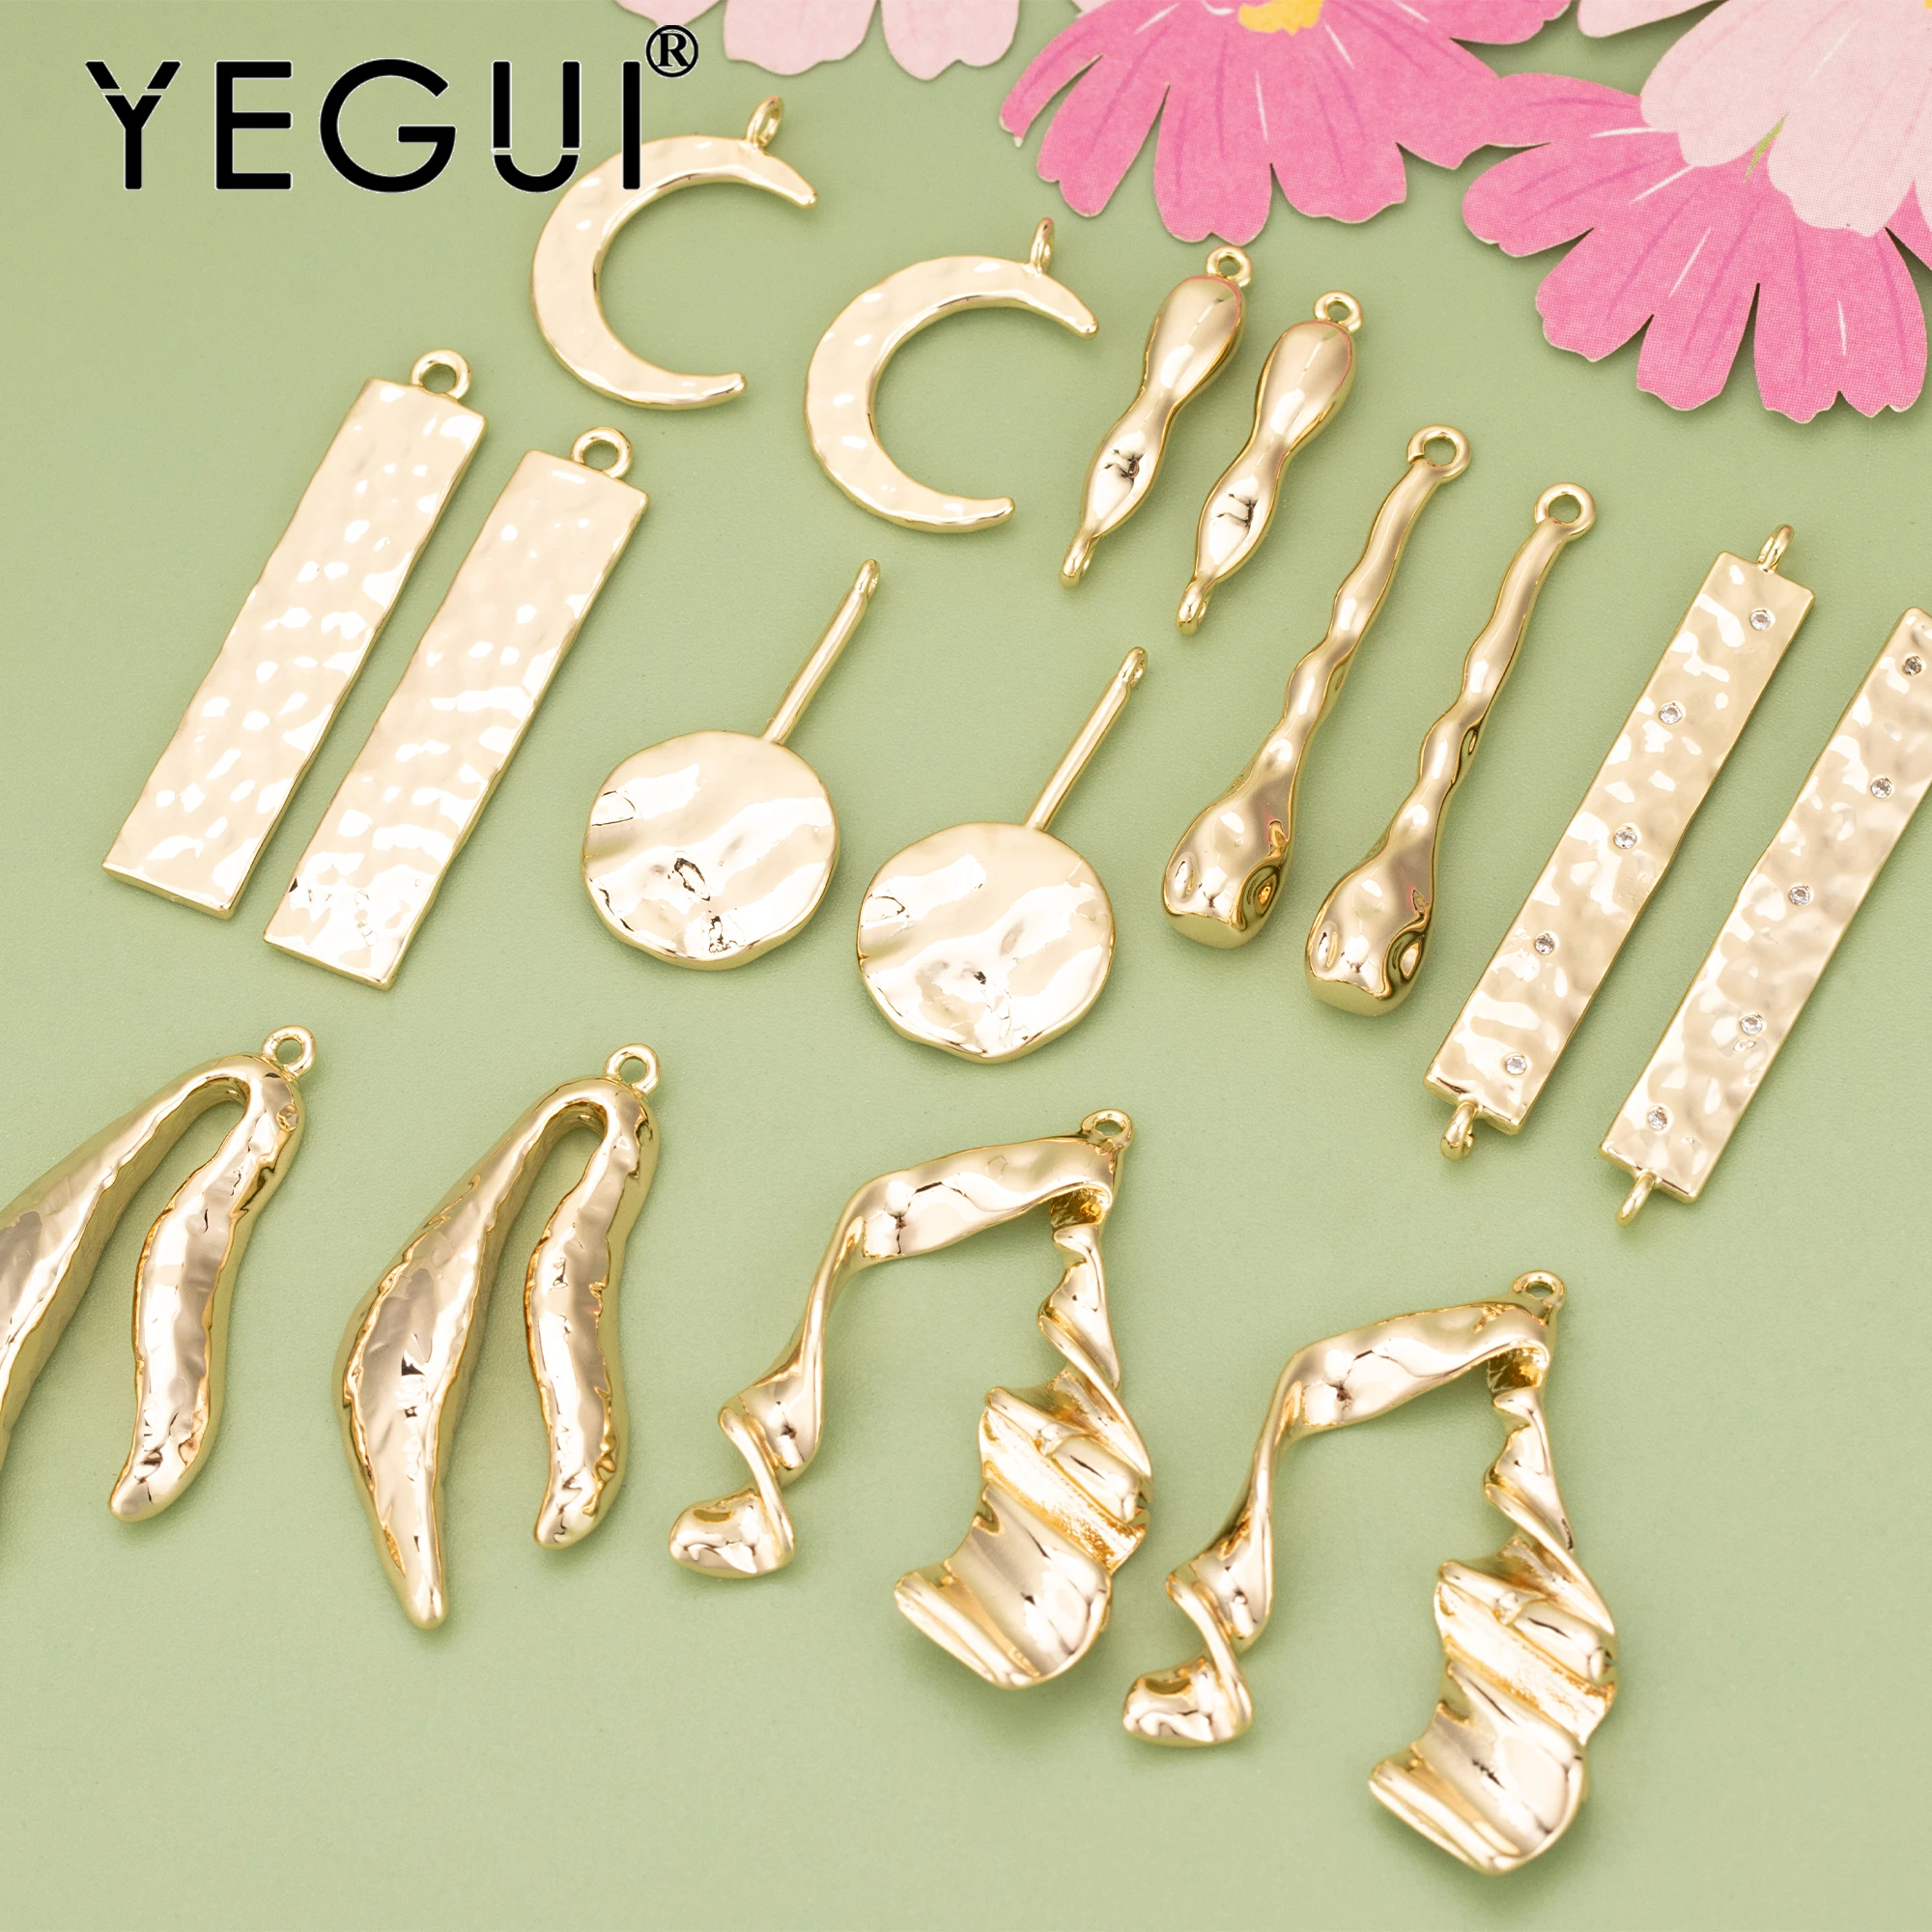 

YEGUI MD69,jewelry accessories,18k gold rhodium plated,copper,nickel free,hand made,charms,diy pendants,jewelry making,6pcs/lot